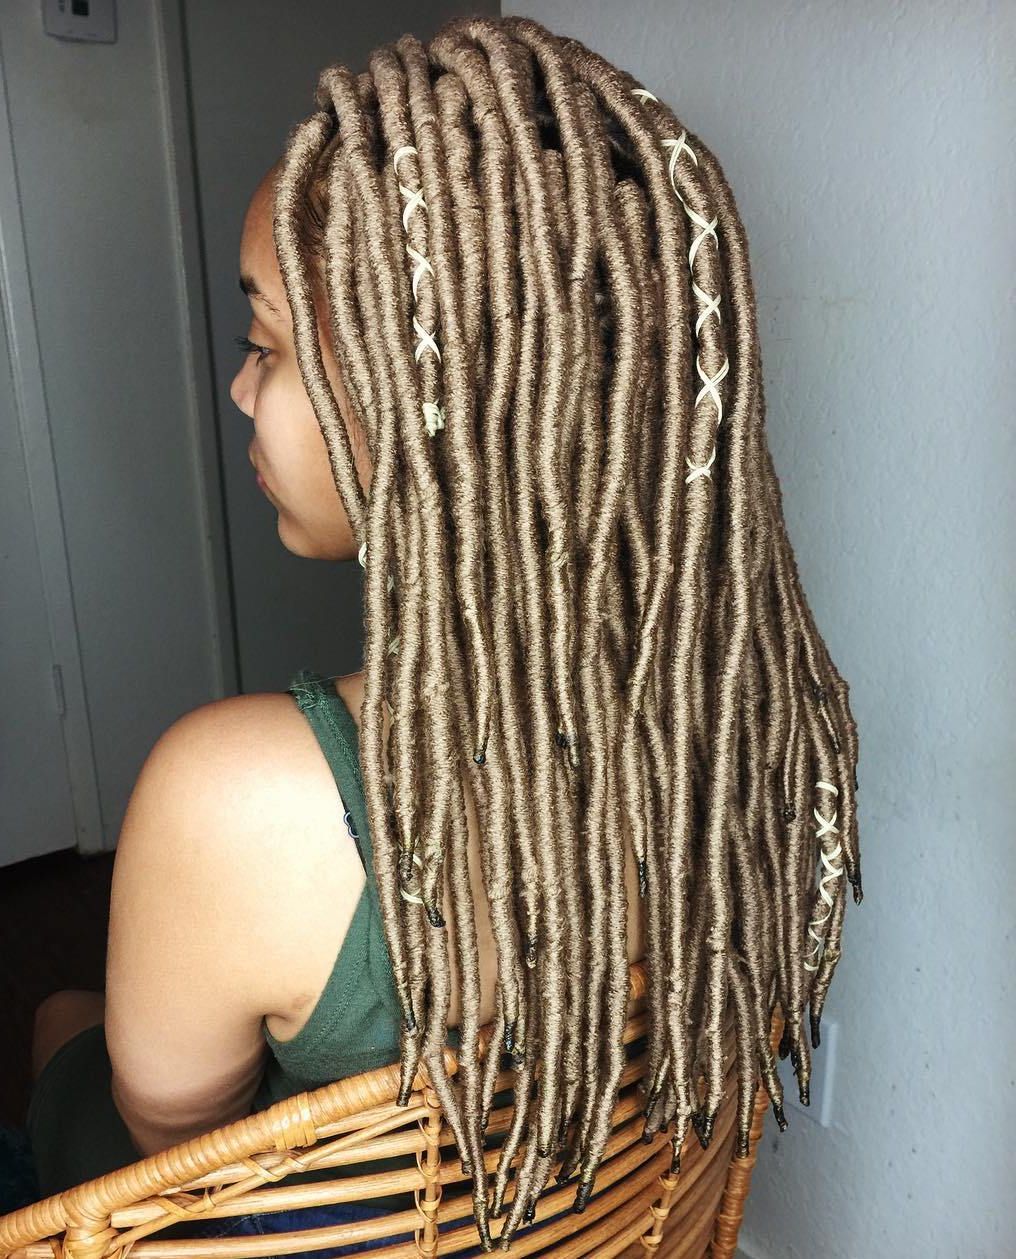 Current Yarn Braid Hairstyles Over Dreadlocks In 20 Playful Ways To Wear Yarn Dreads (View 4 of 20)